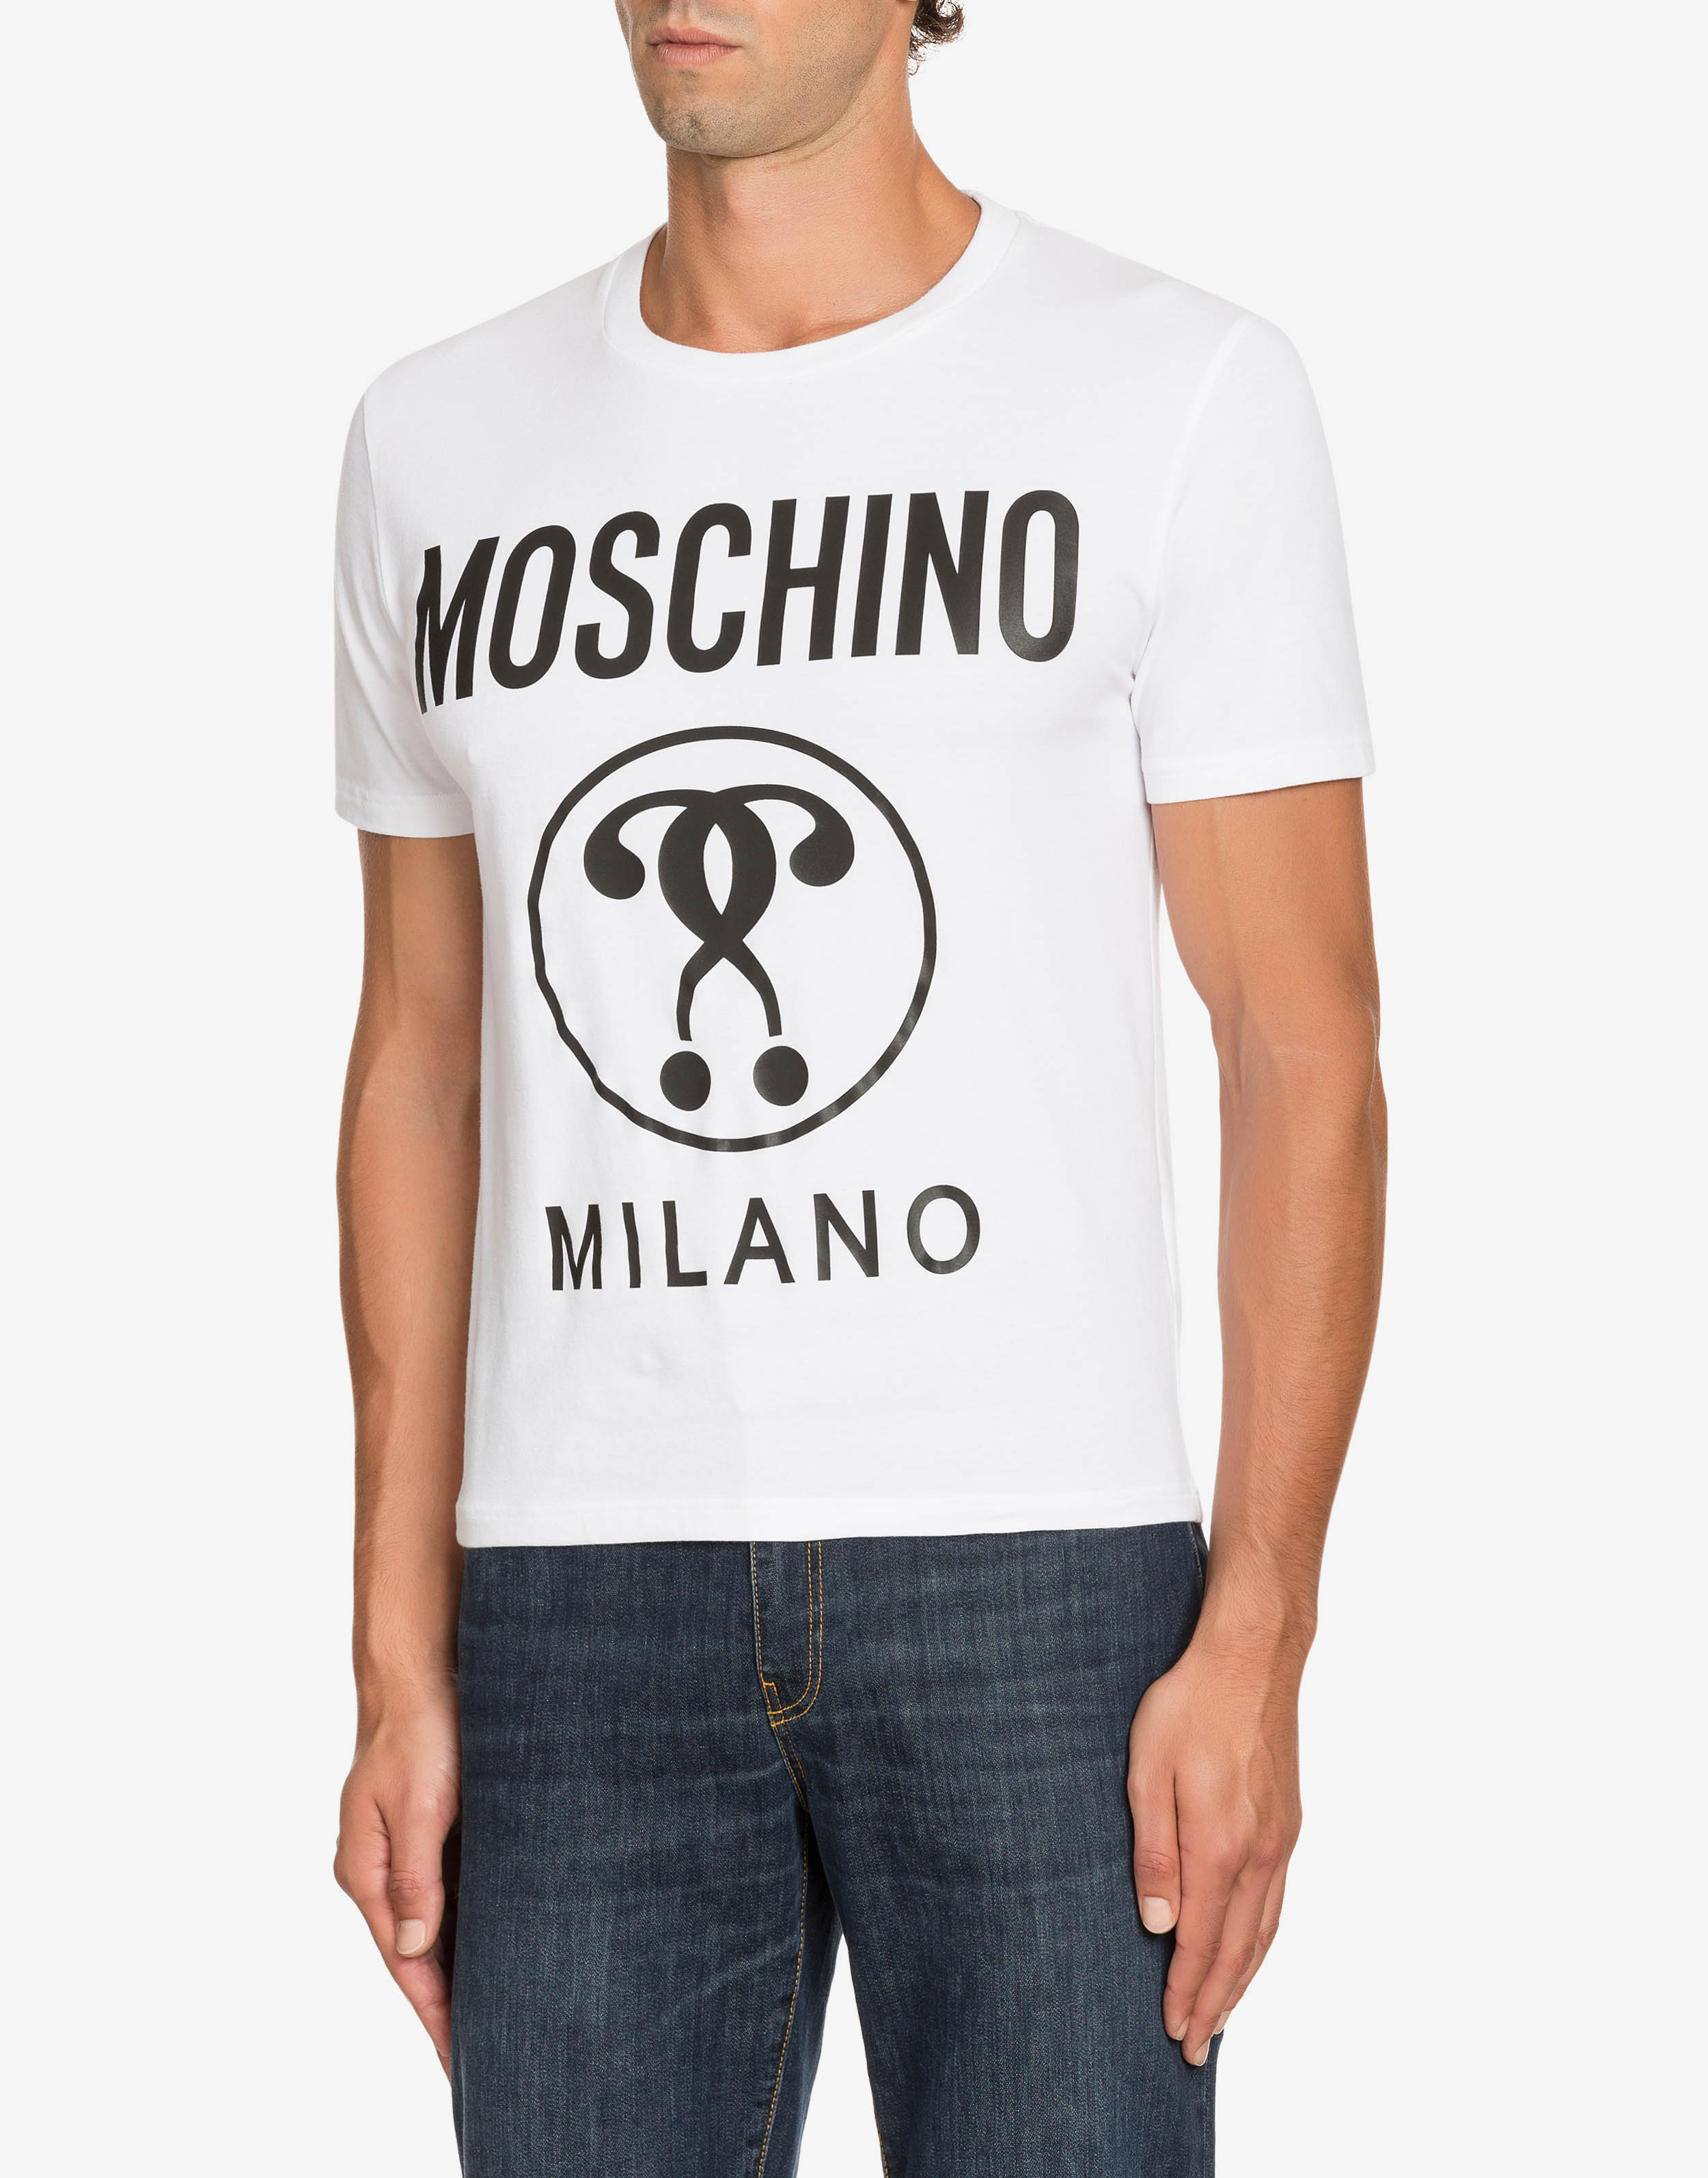 Moschino Clothing for Men - Official Store USA